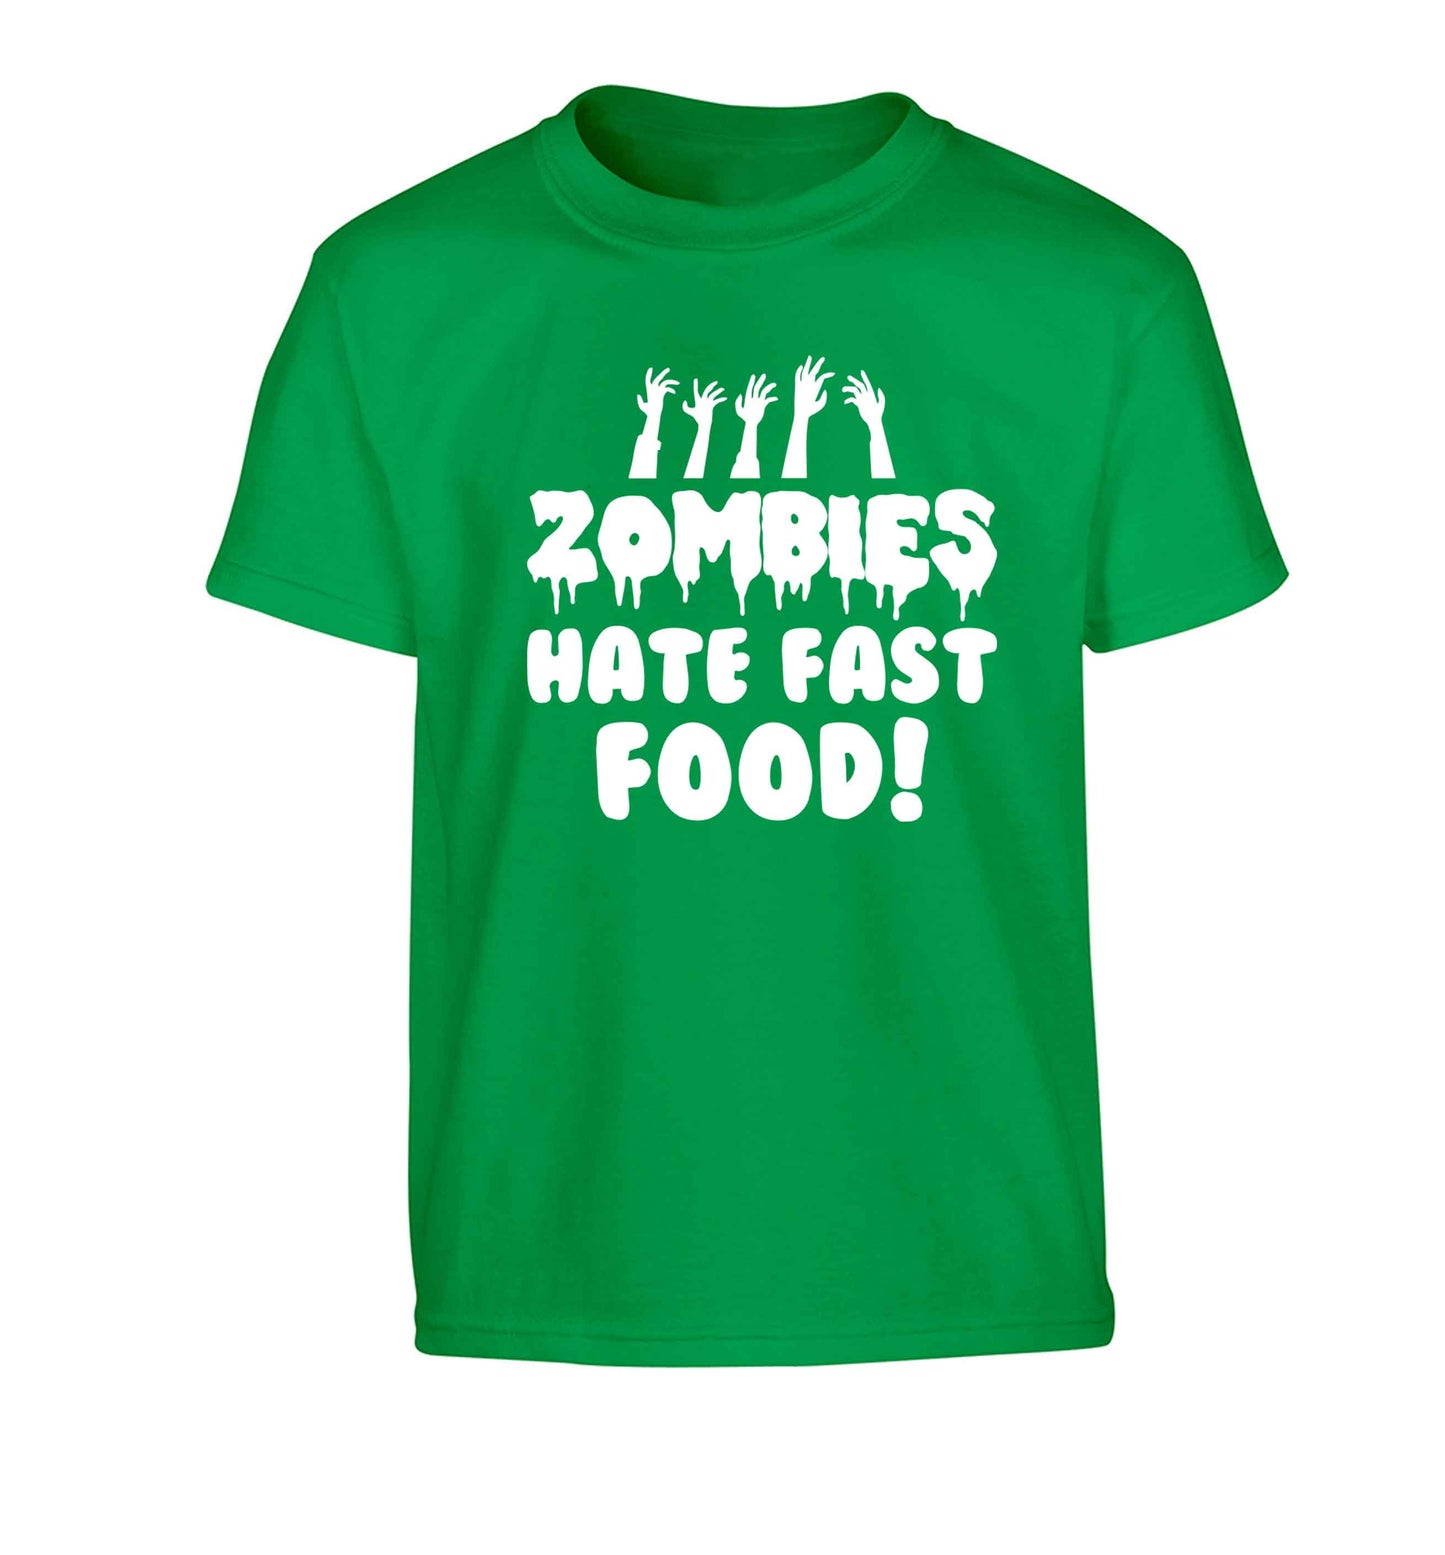 Zombies hate fast food Children's green Tshirt 12-13 Years